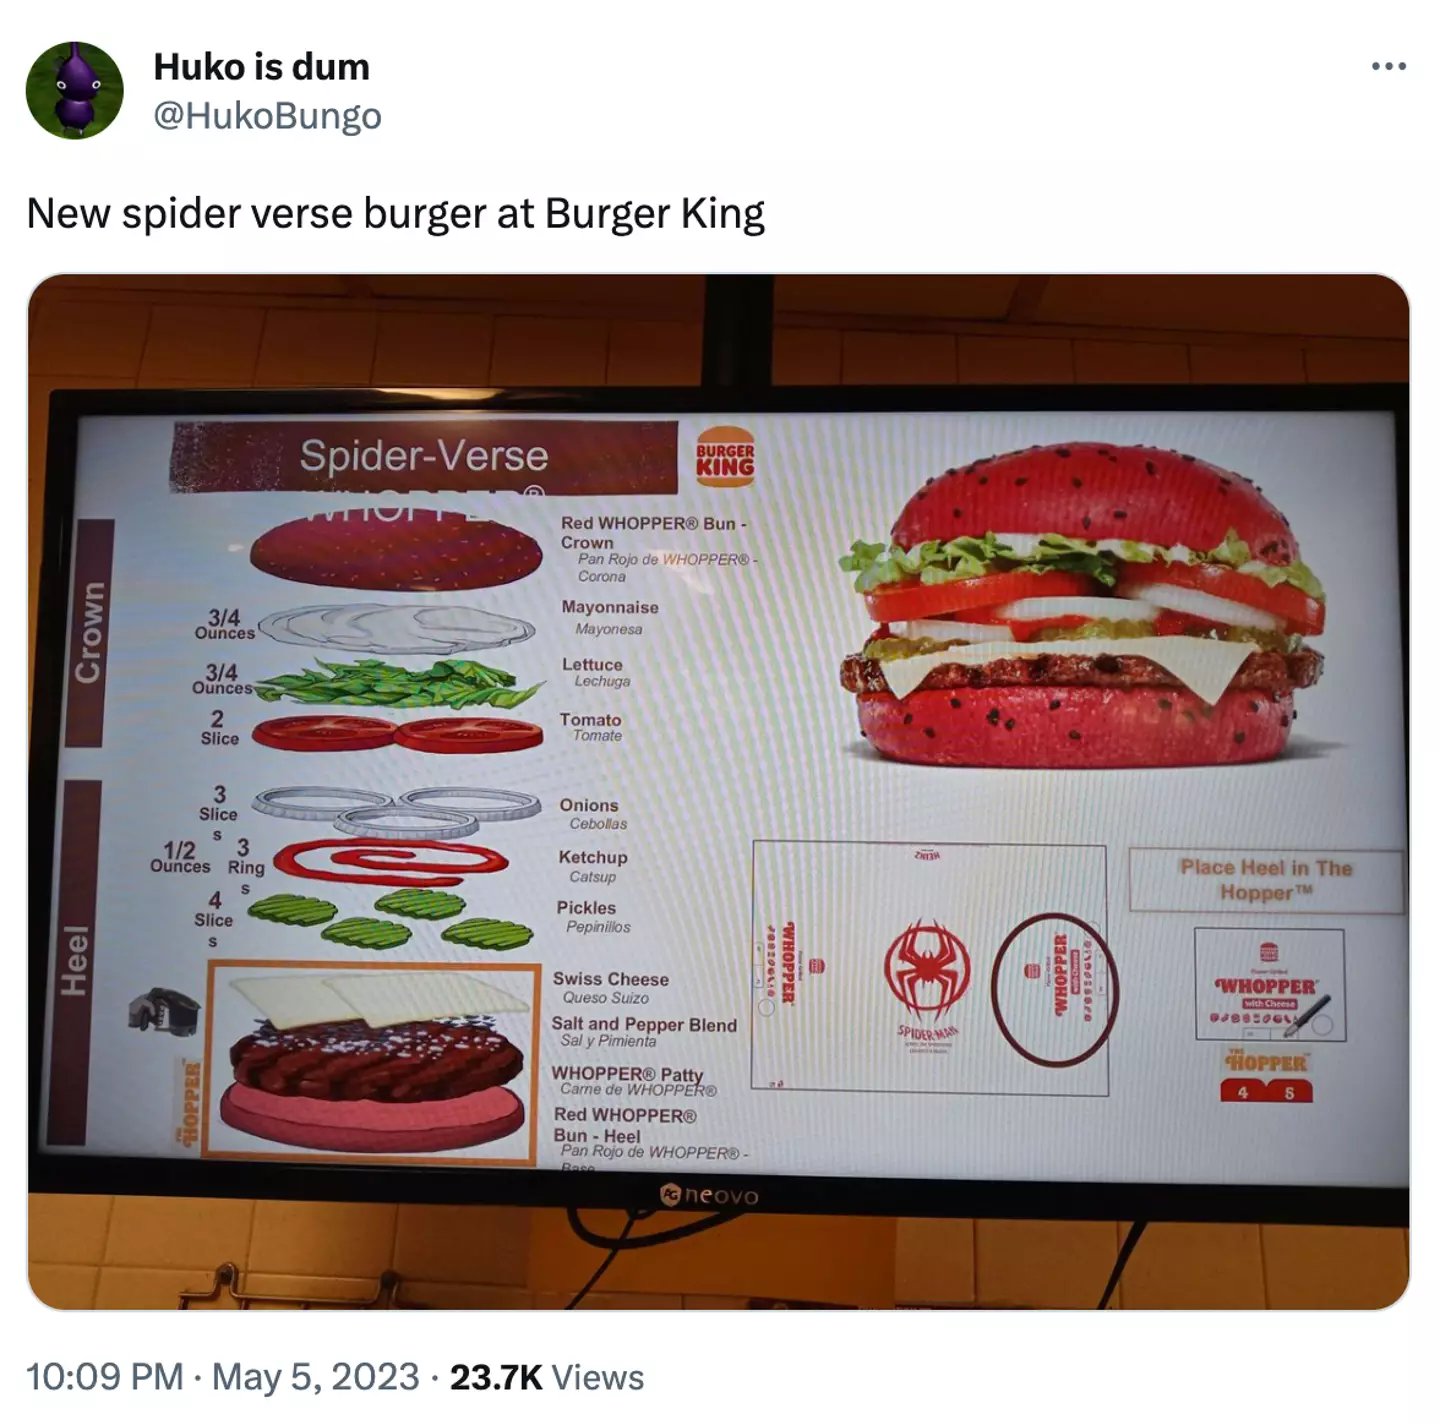 The Spider-Verse whopper.